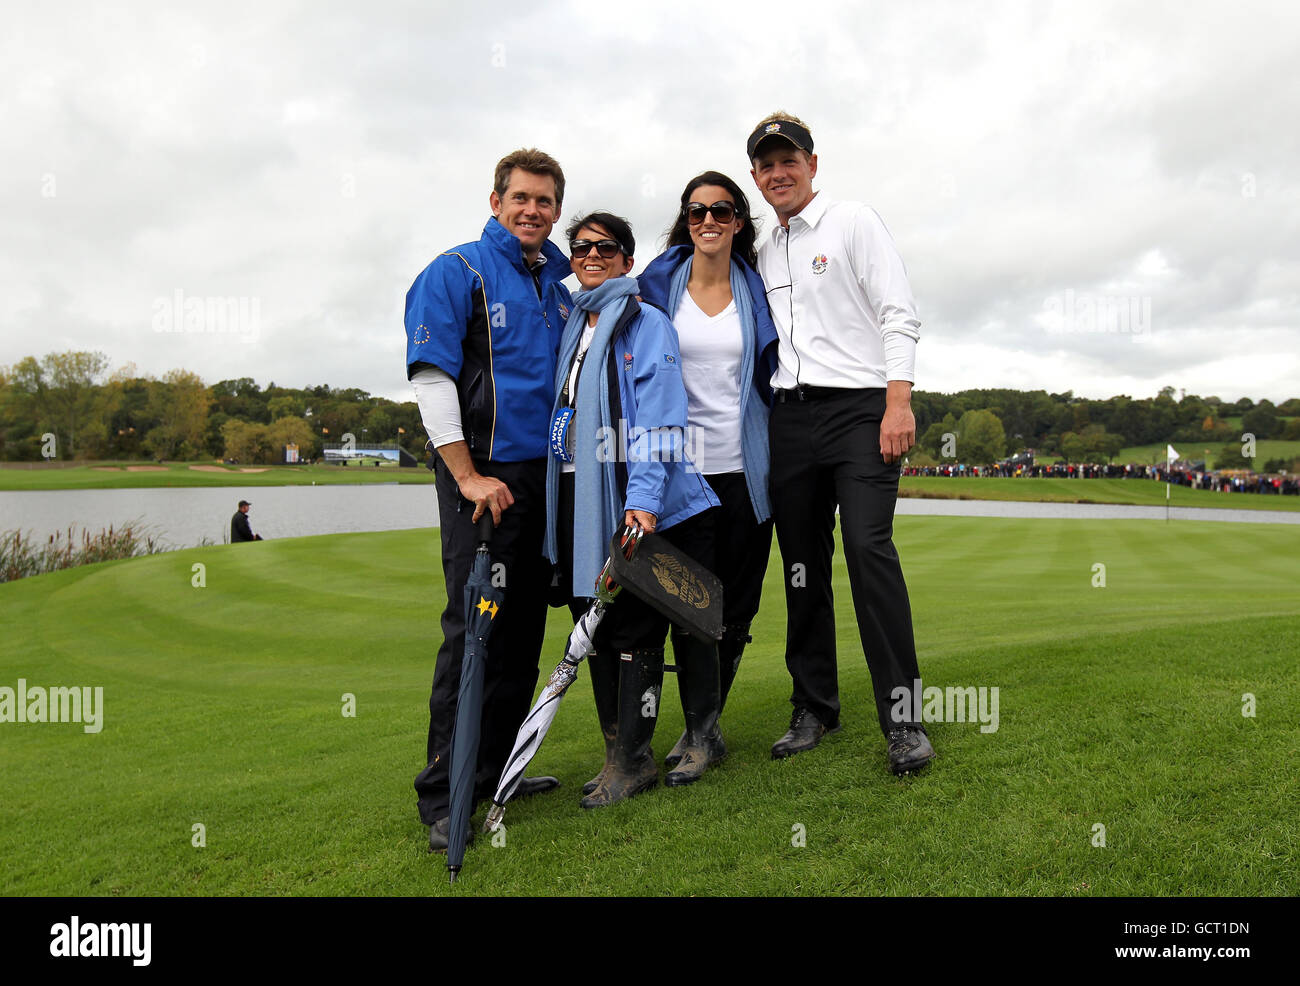 Europe's Lee Westwood (left) and his wife Laurae (second left) and Luke Donald (right) and his wife Diane Donald (second right) pose for photographers on the 13th green after they beat the USA's Tiger Woods and Steve Stricker in the session 3 foursomes, during the Ryder Cup at Celtic Manor, Newport. Stock Photo